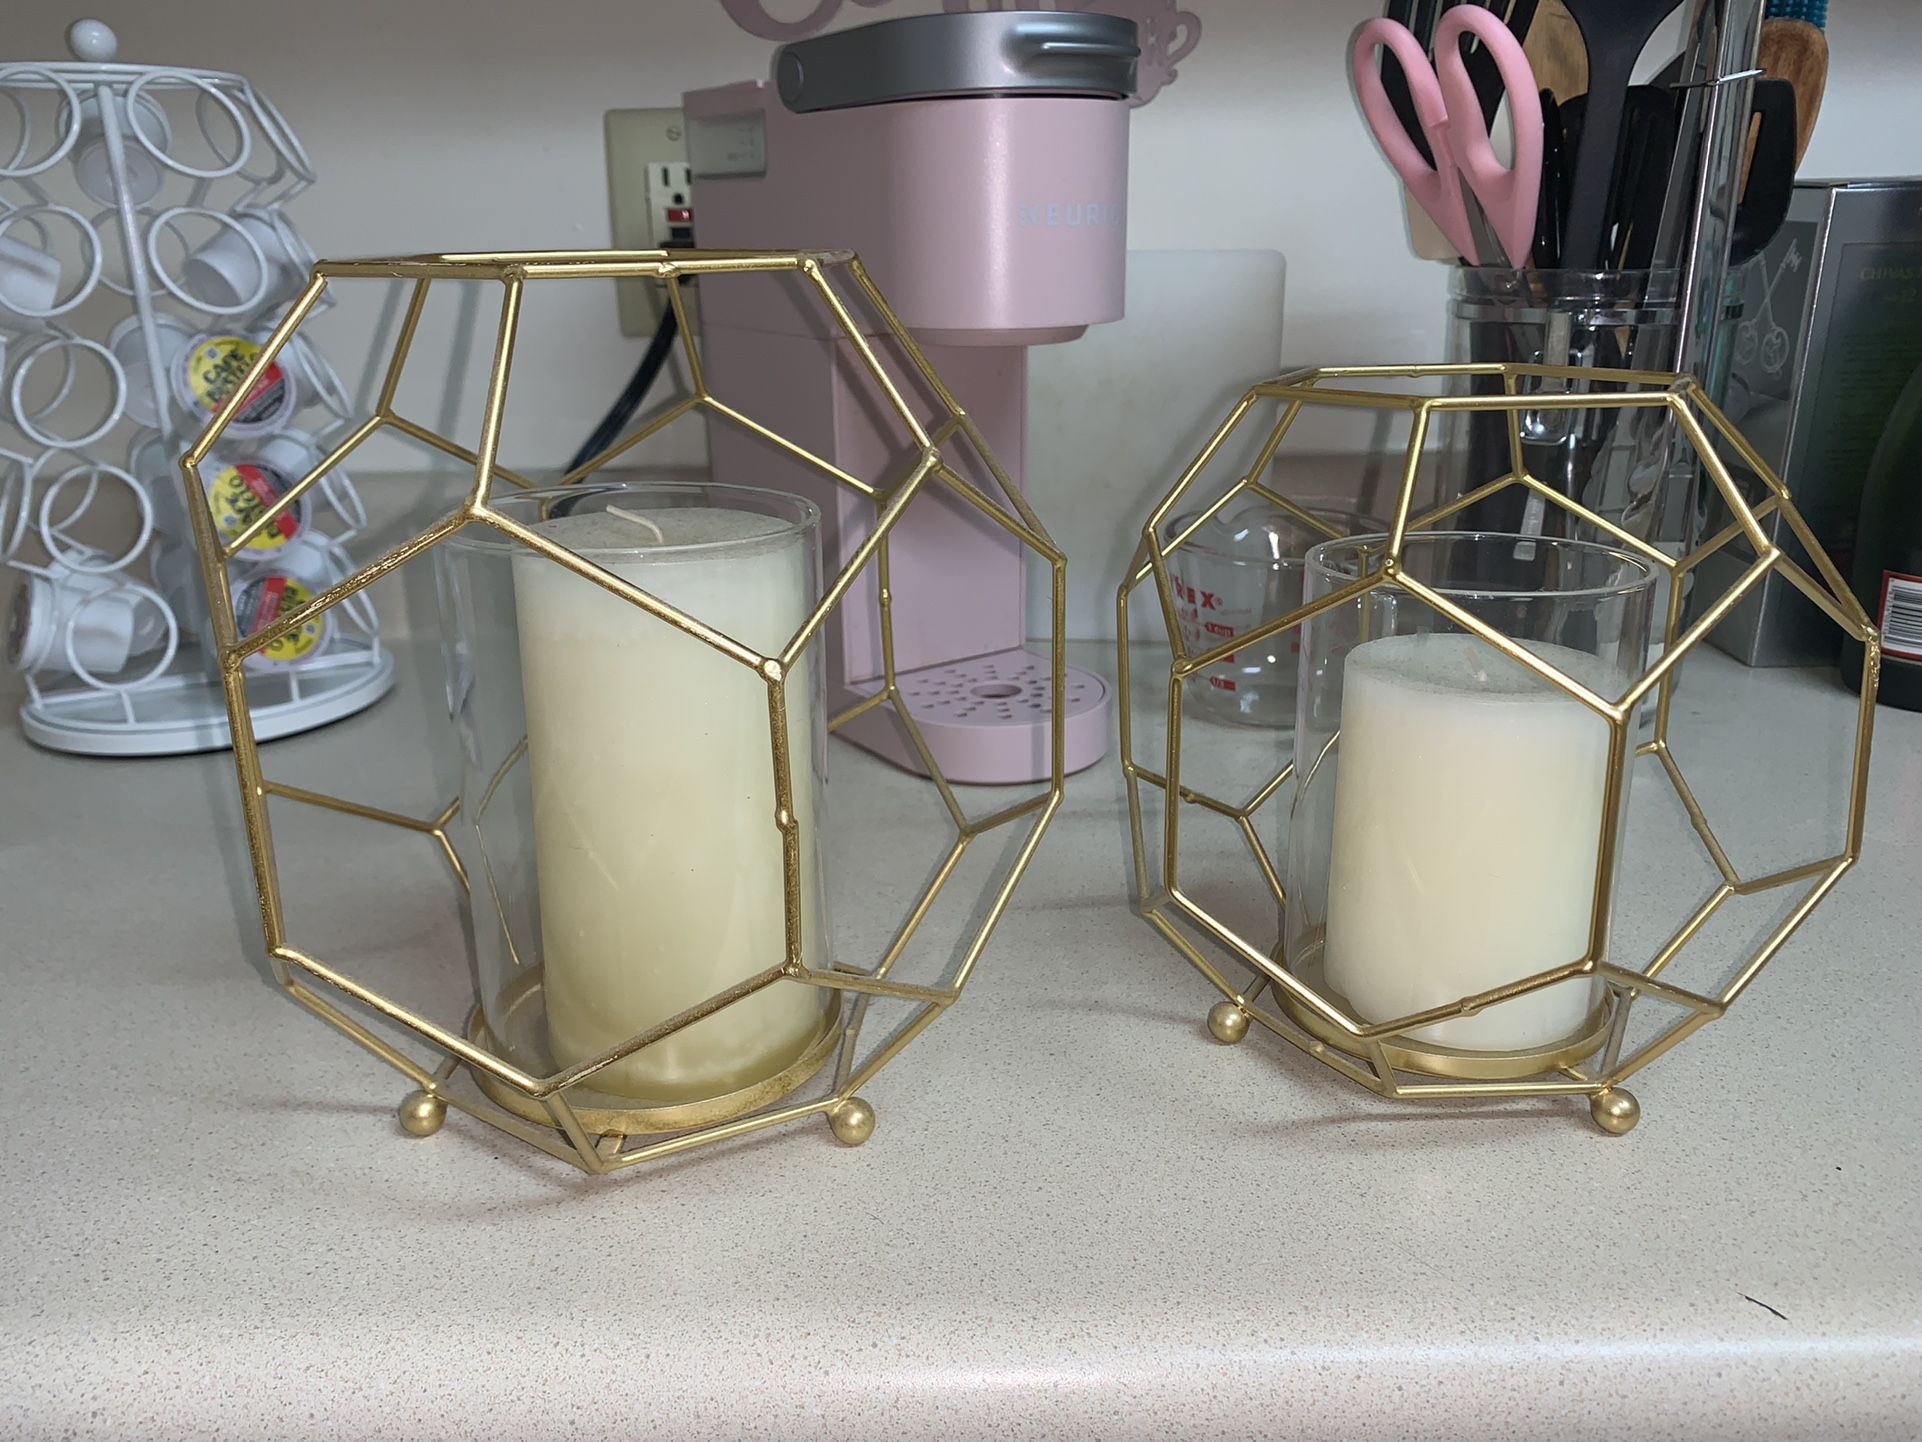 2 Gold Decorative Candle Holders 